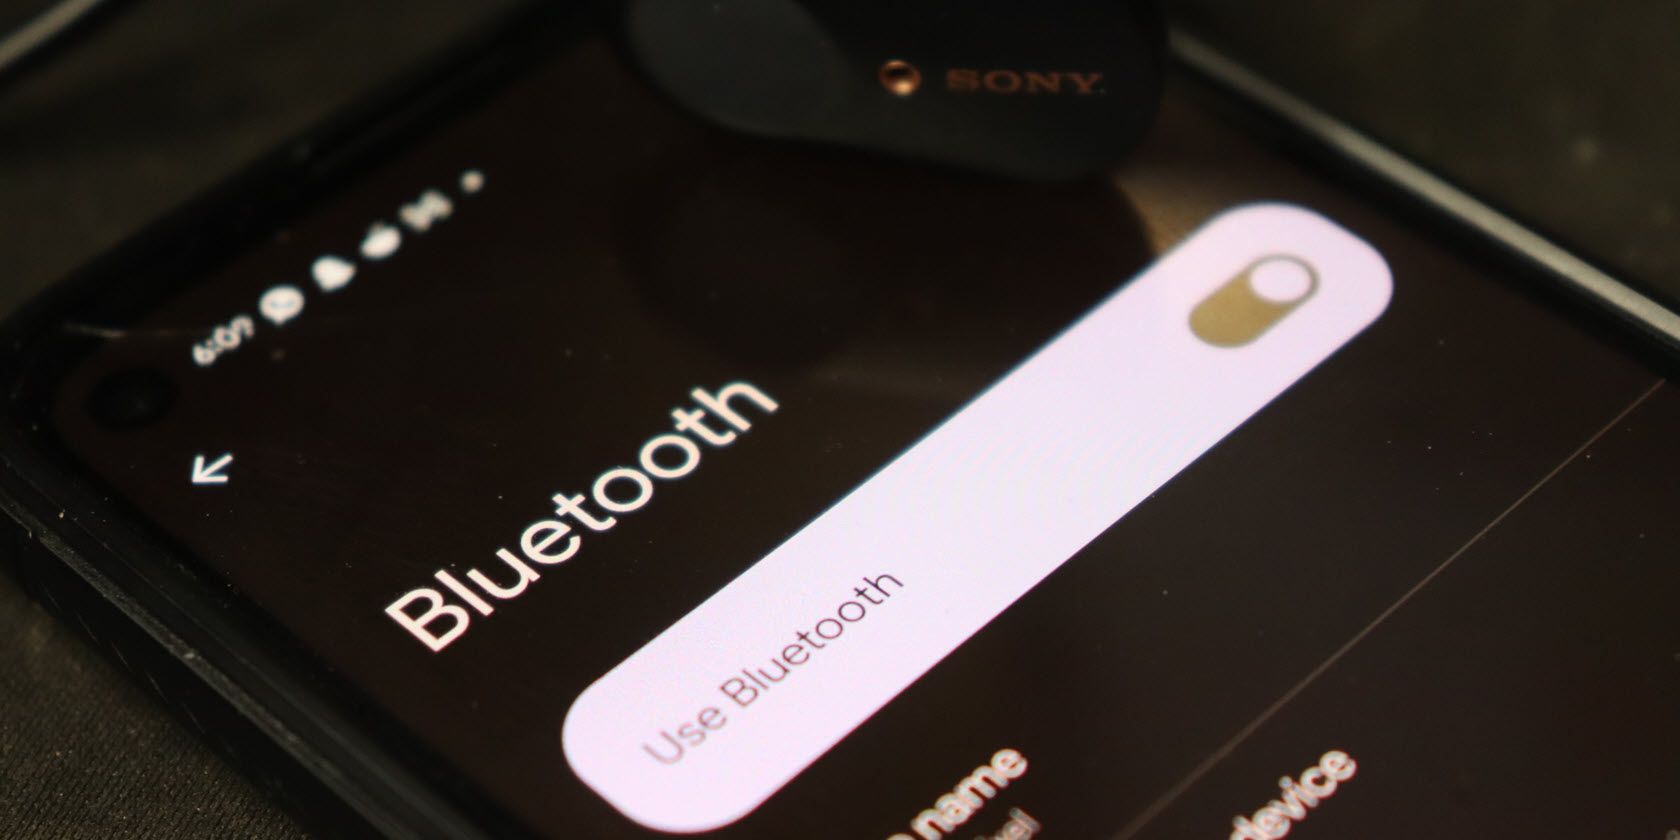 Photo showing the Bluetooth option on a Pixel 4a